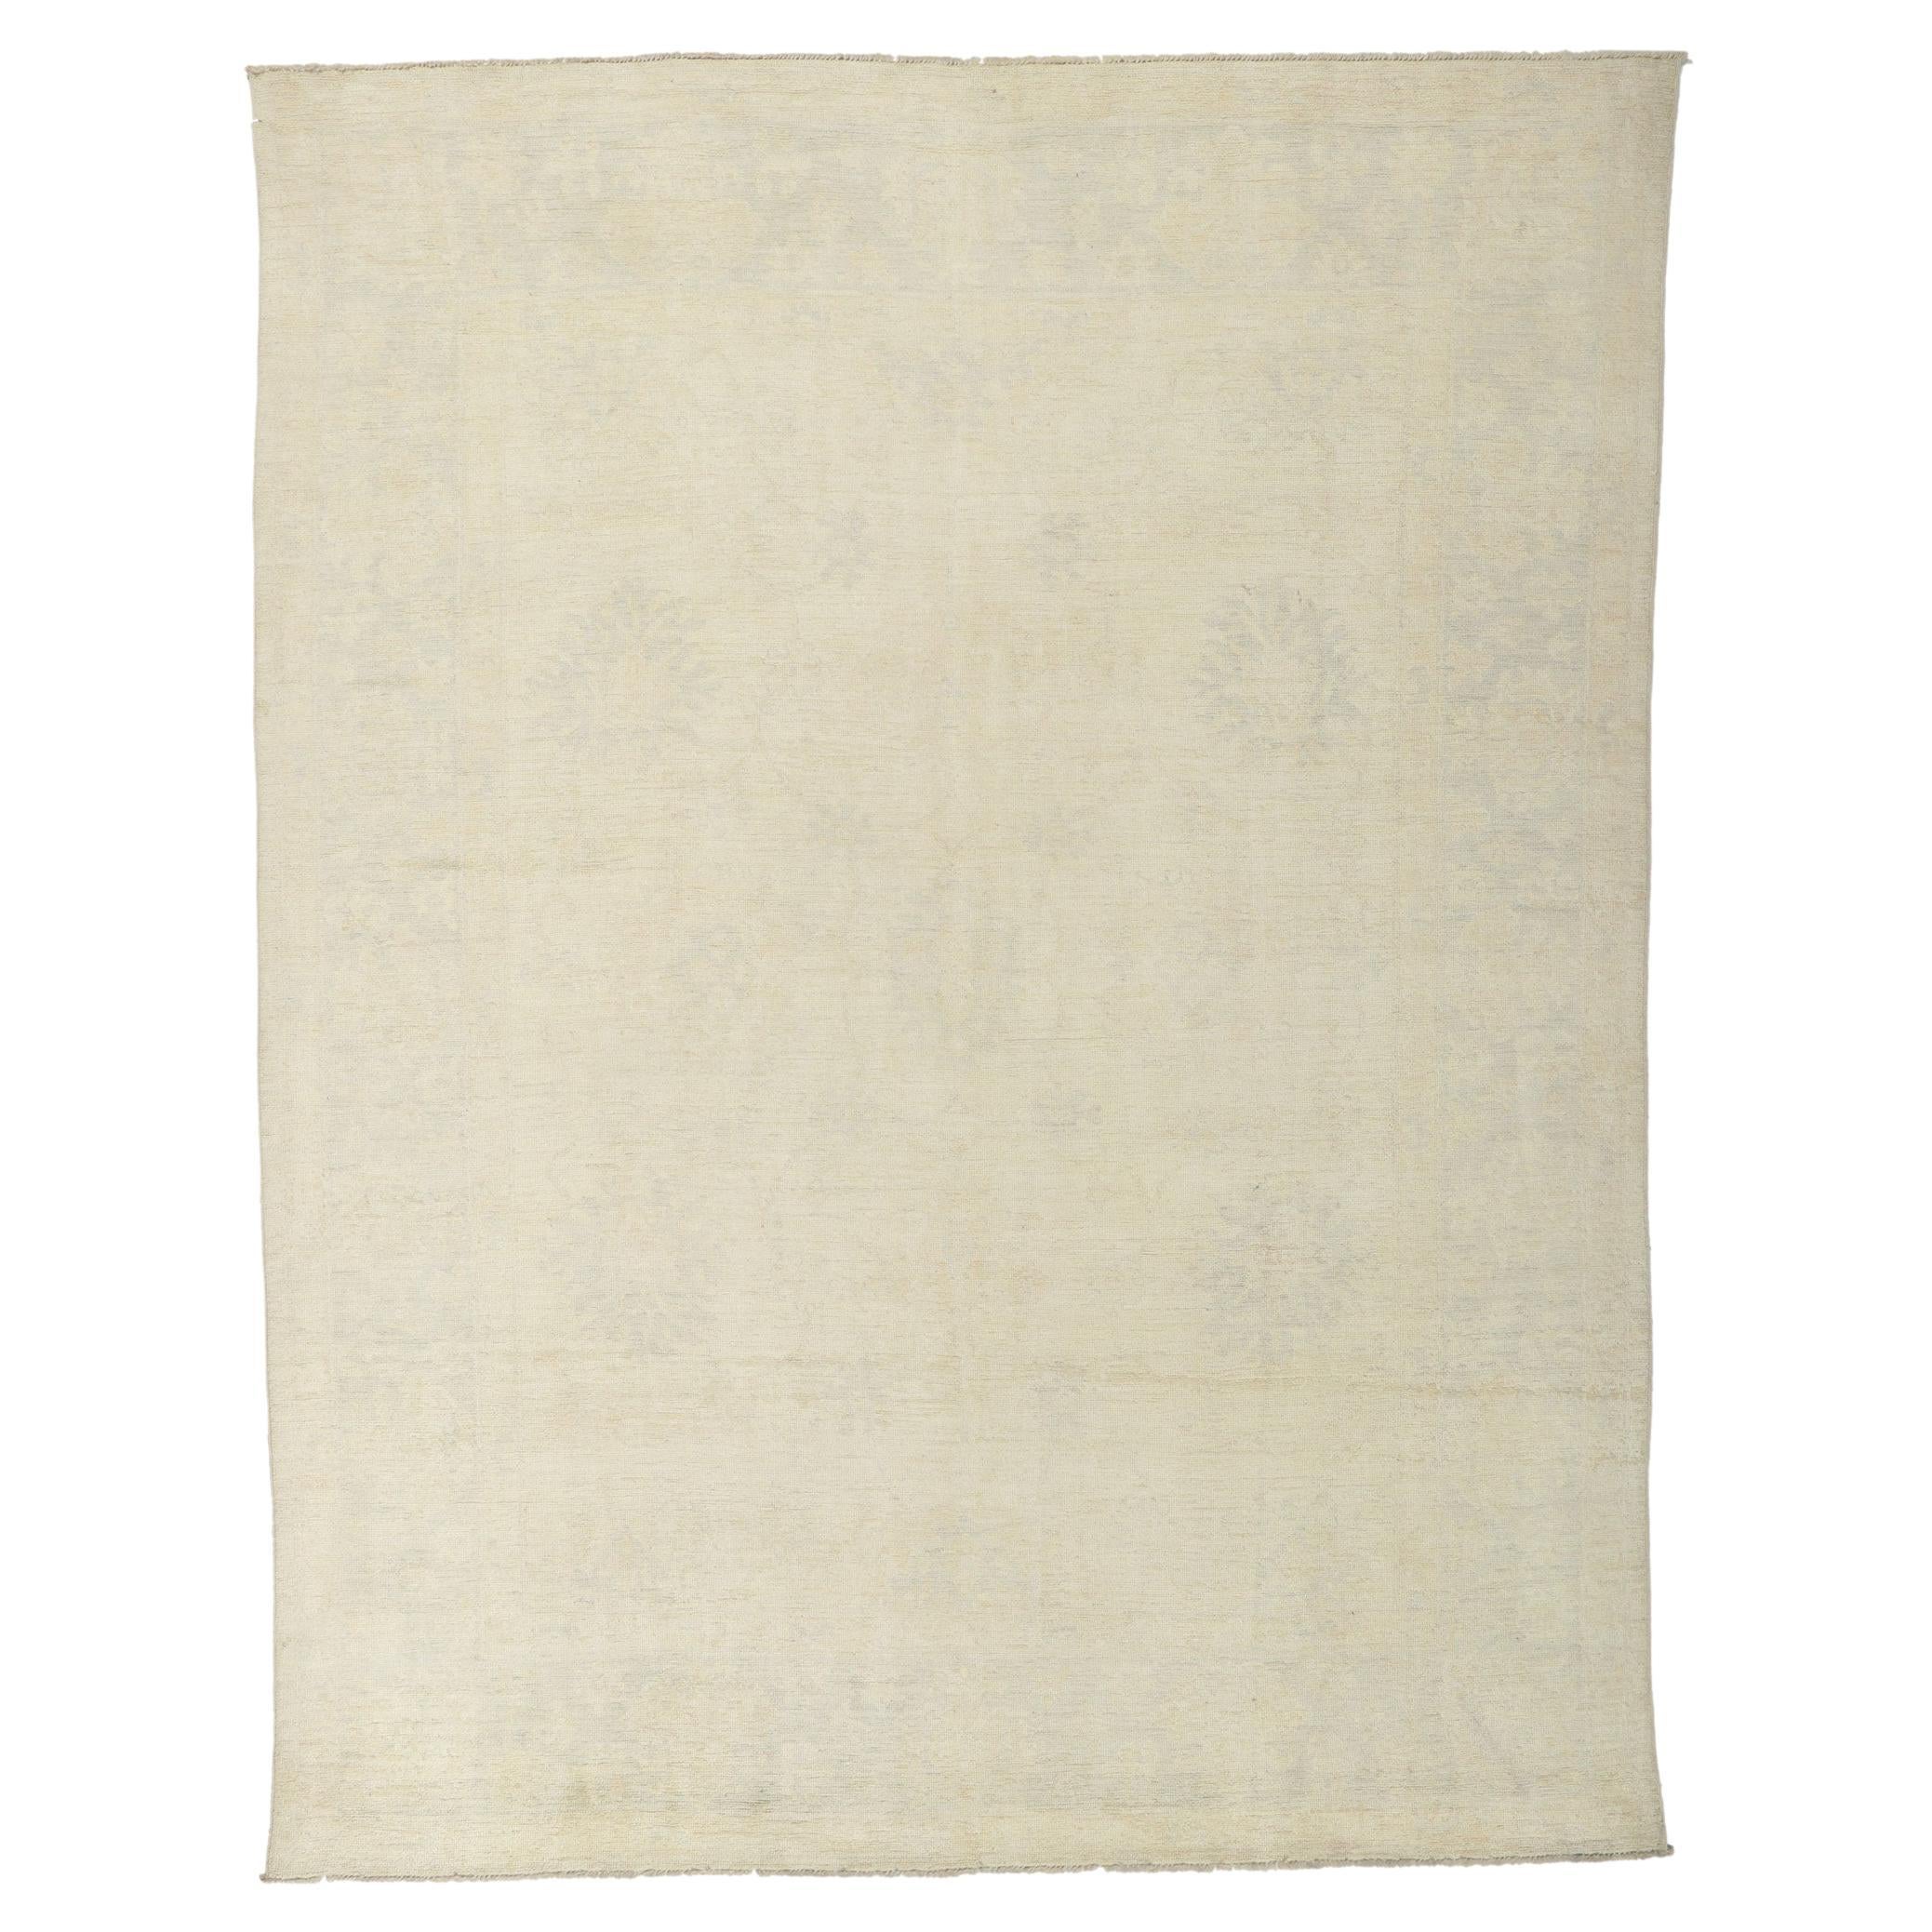 New Vintage-Inspired Muted Oushak Rug with Faded Neutral Colors